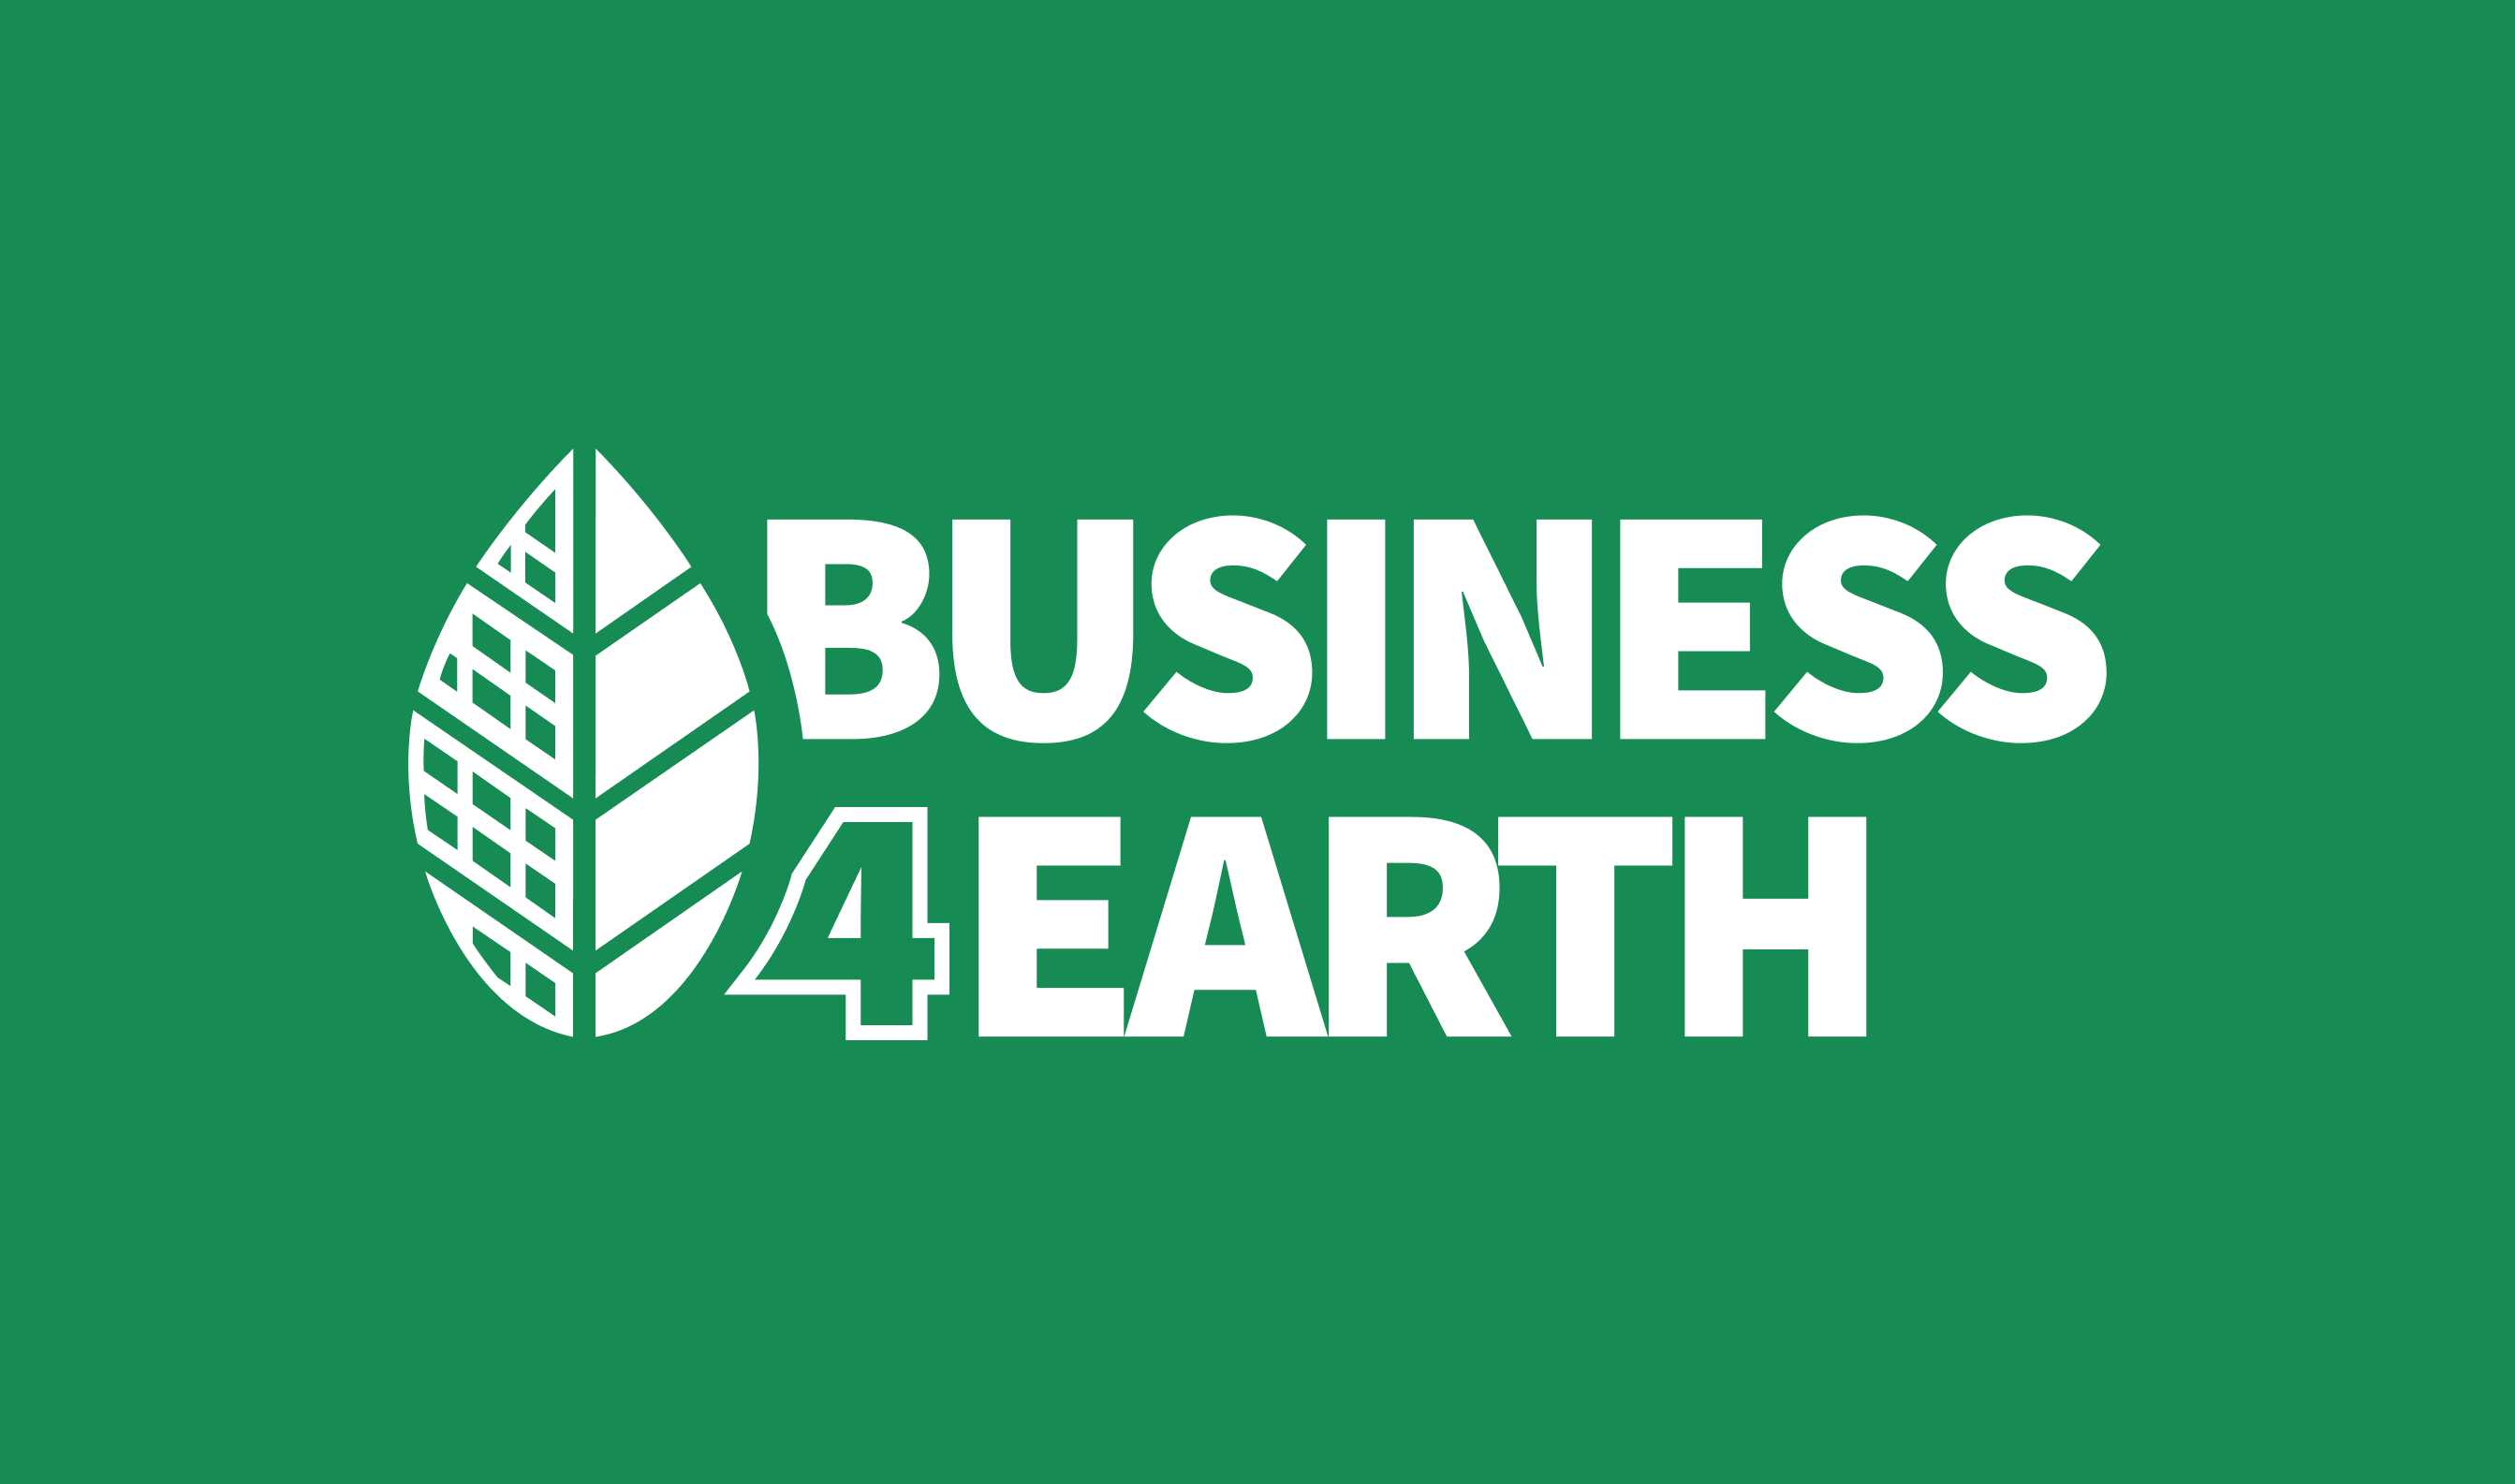 Business4earth